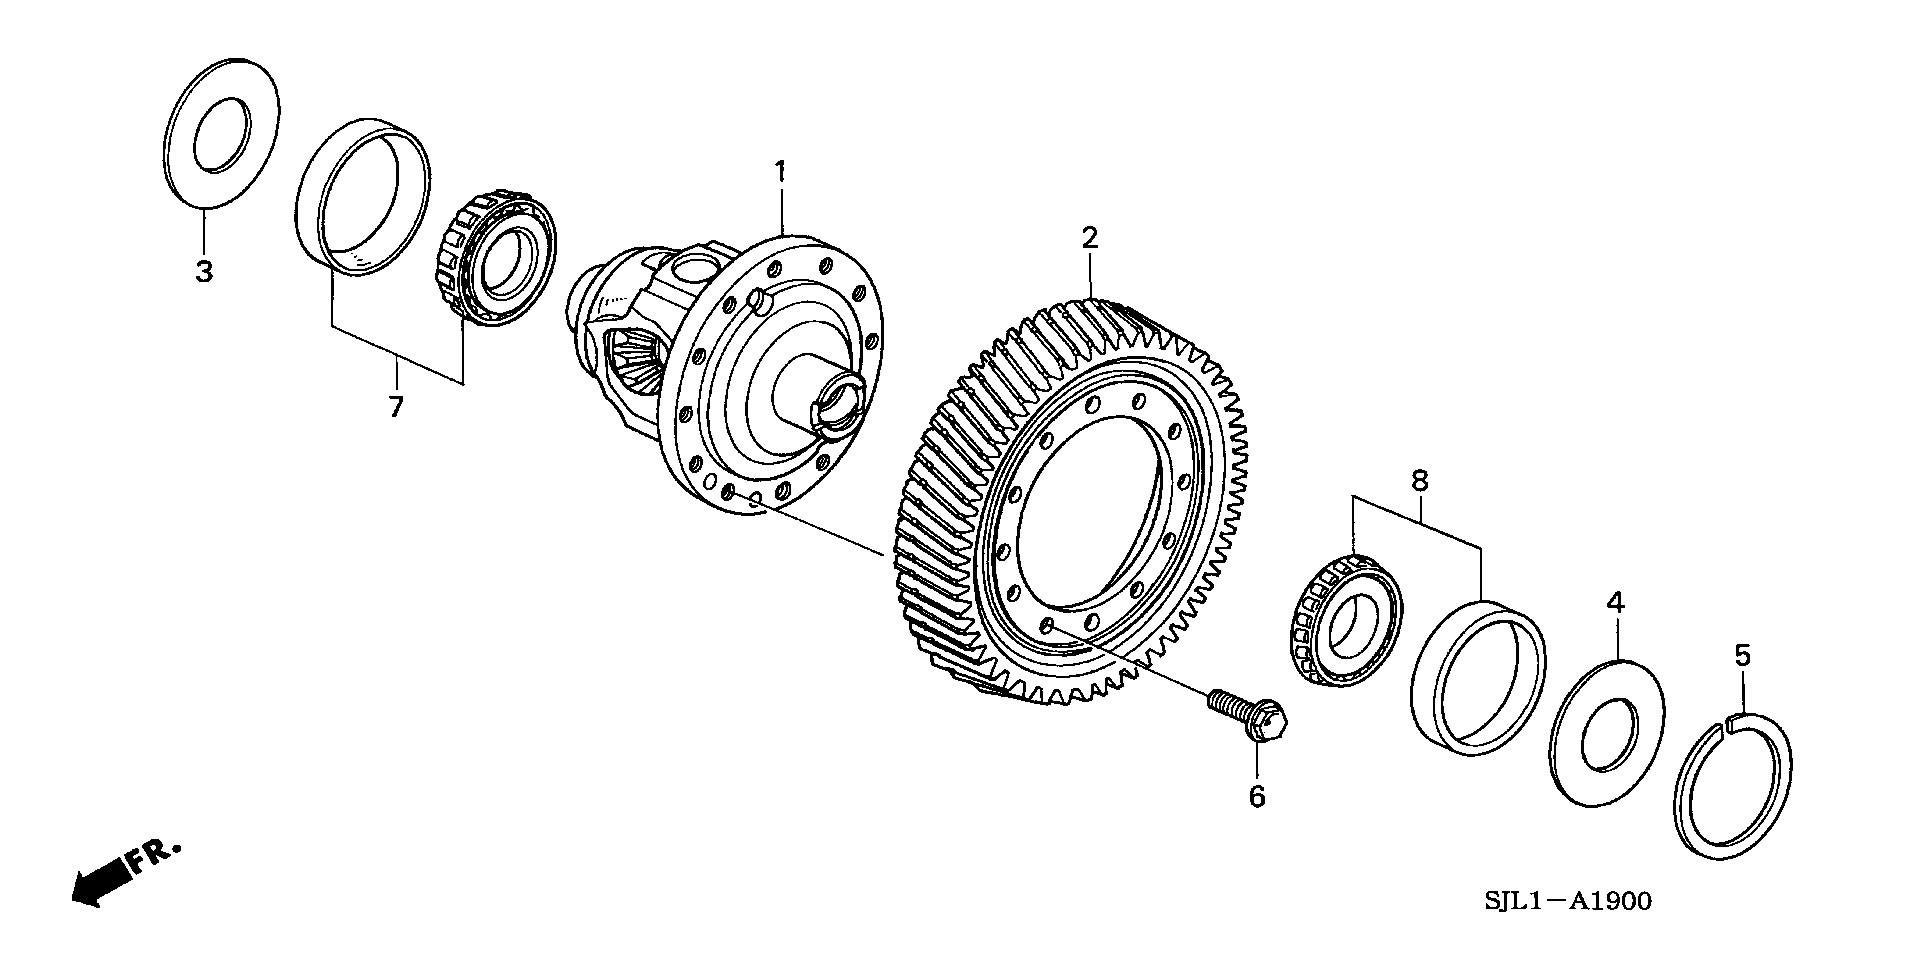 DIFFERENTIAL(2WD)(V6)